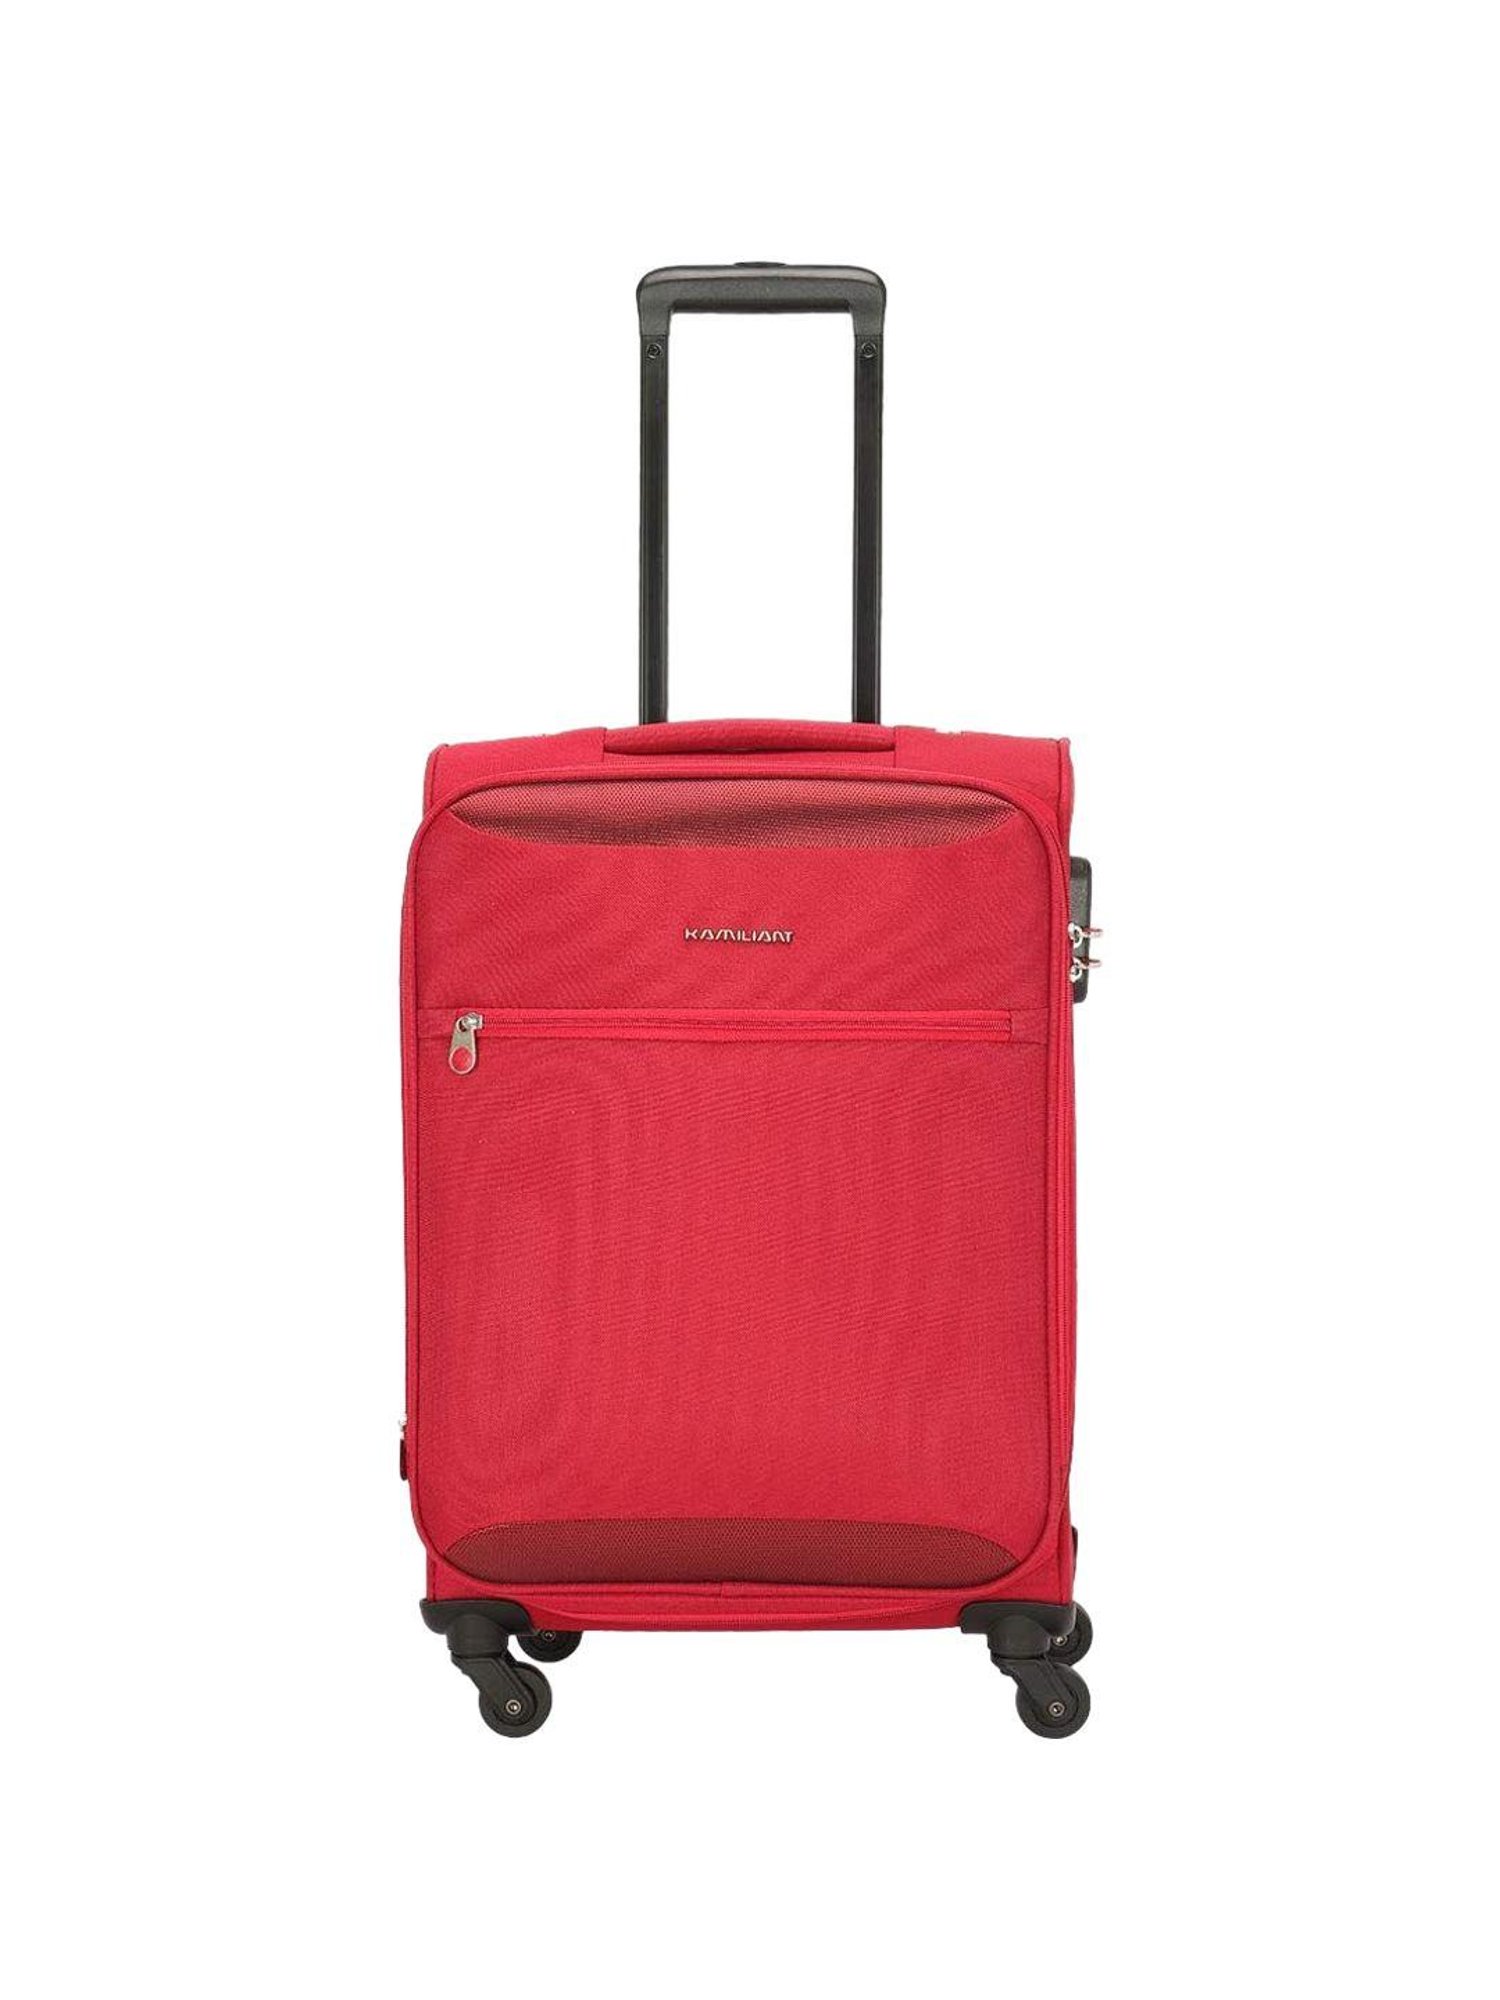 ROCKLITE KAMILIANT BY AMERICAN TOURISTER LARGE SIZE 78 CM HARD LUGGAGE –  arihant-bag-center